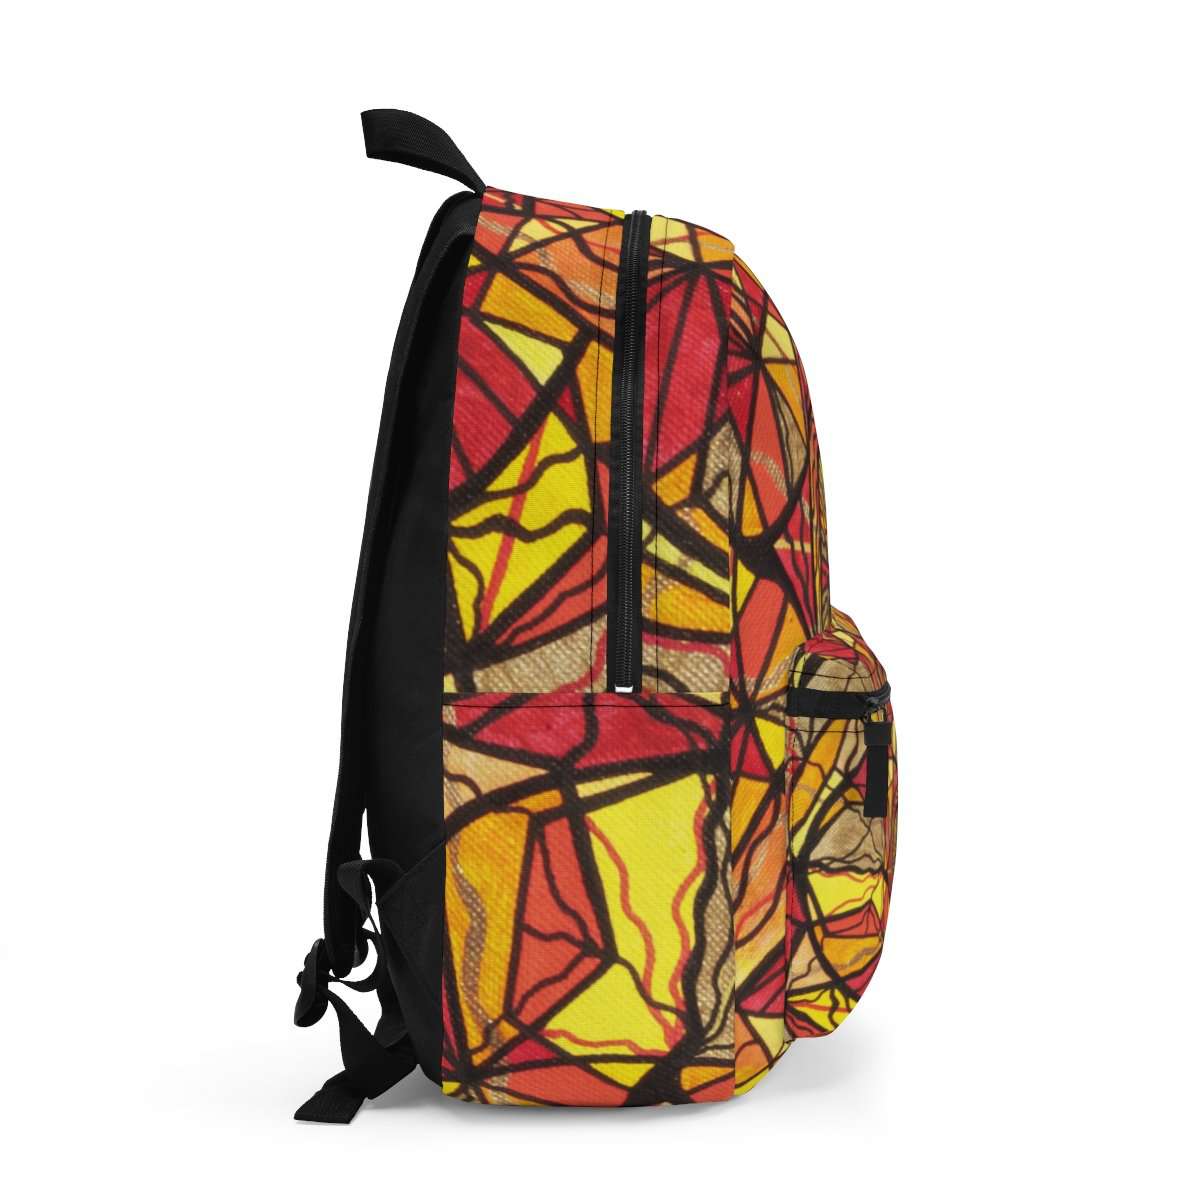 cheapest-empowerment-aop-backpack-hot-on-sale_0.jpg